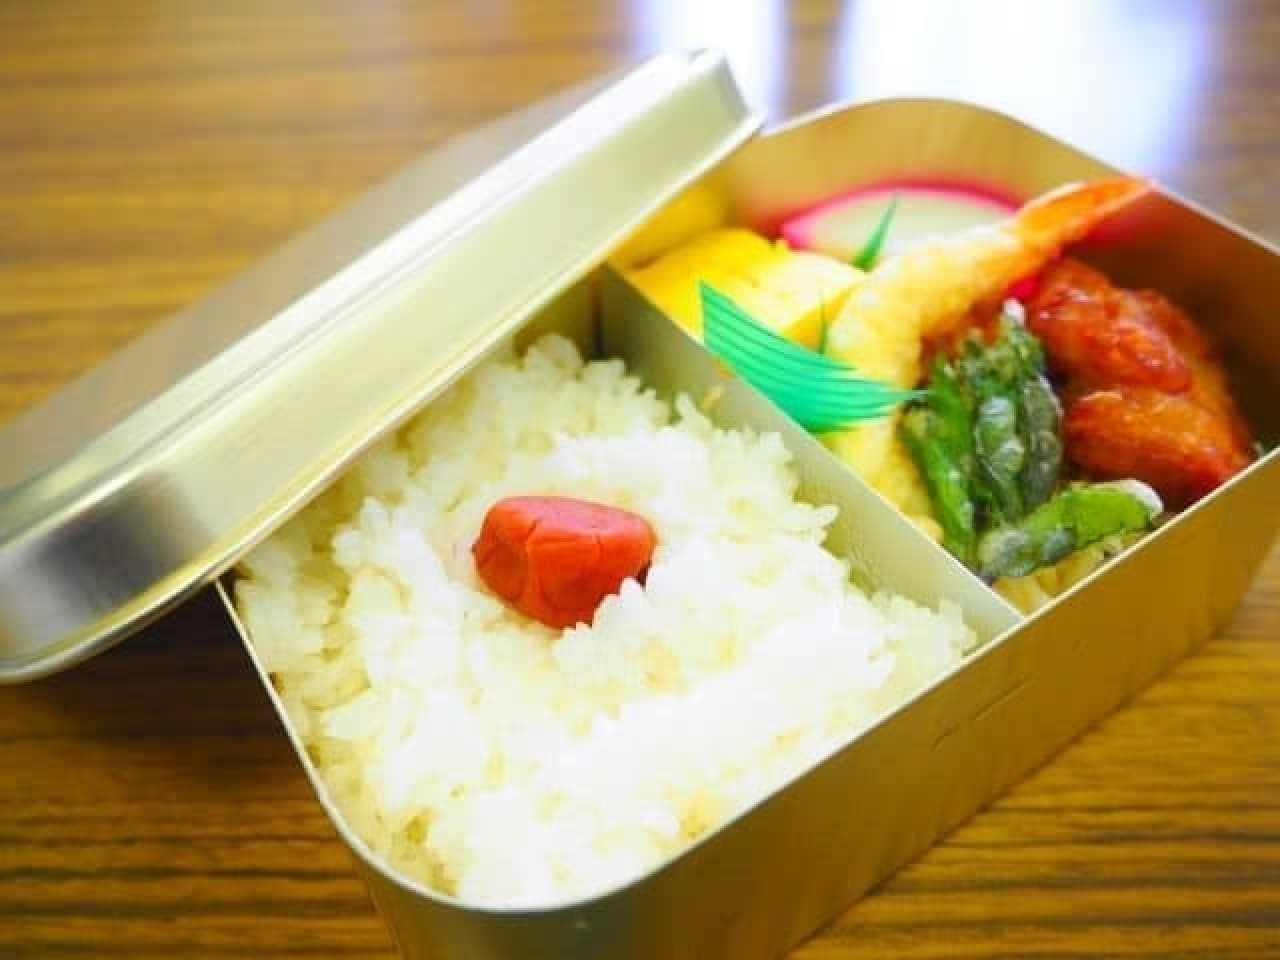 Do you make lunch boxes?